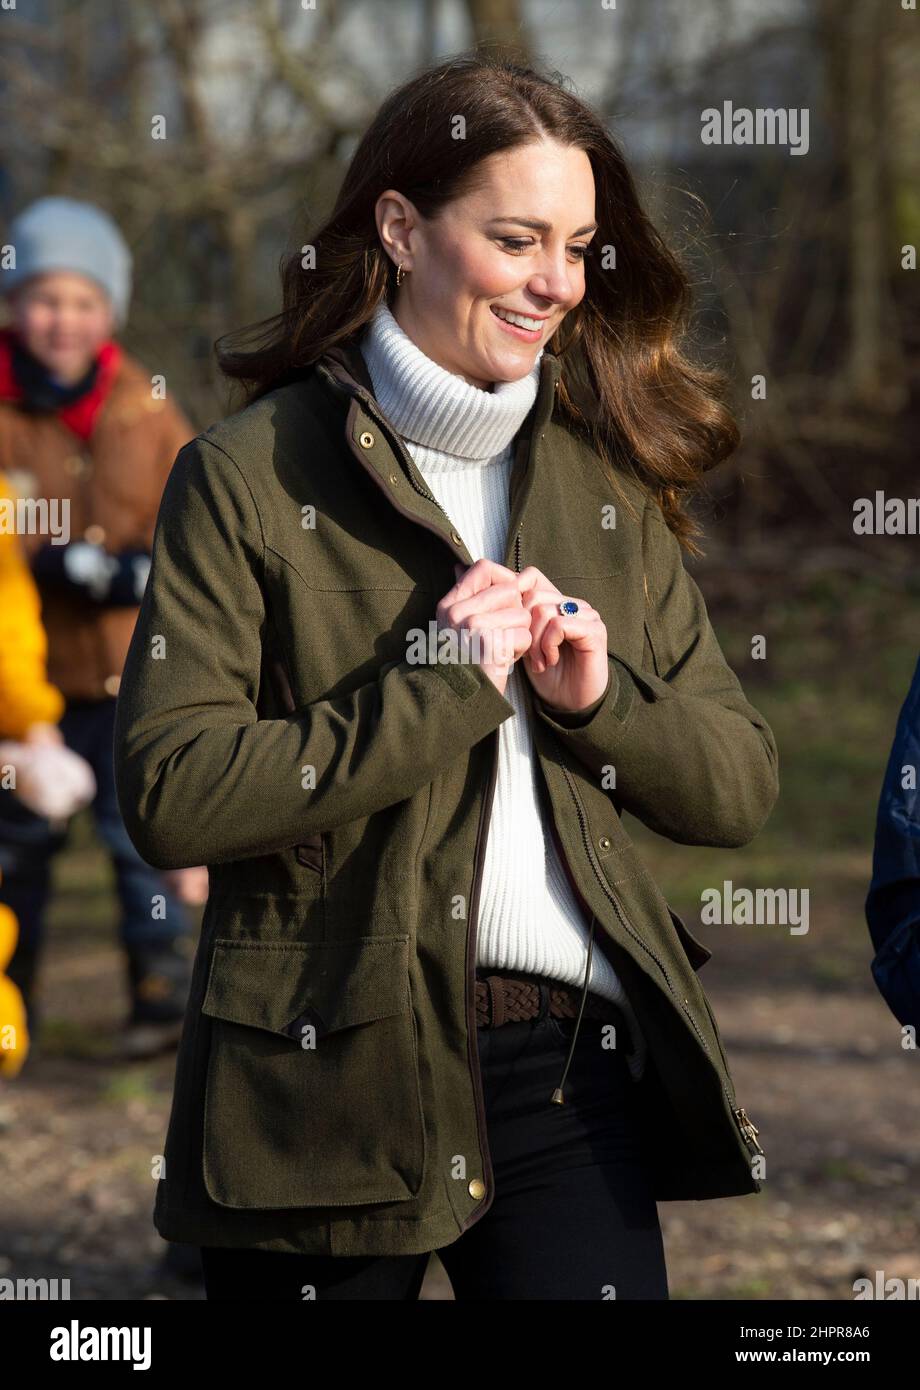 Copenhagen, Denmark. 23rd Feb, 2022. The Duchess of Cambridge visiting  Stenurten Forest Kindergarten. The Duchess was there to hear about their  approach to learning, which focuses on social and emotional development.  Copenhagen,